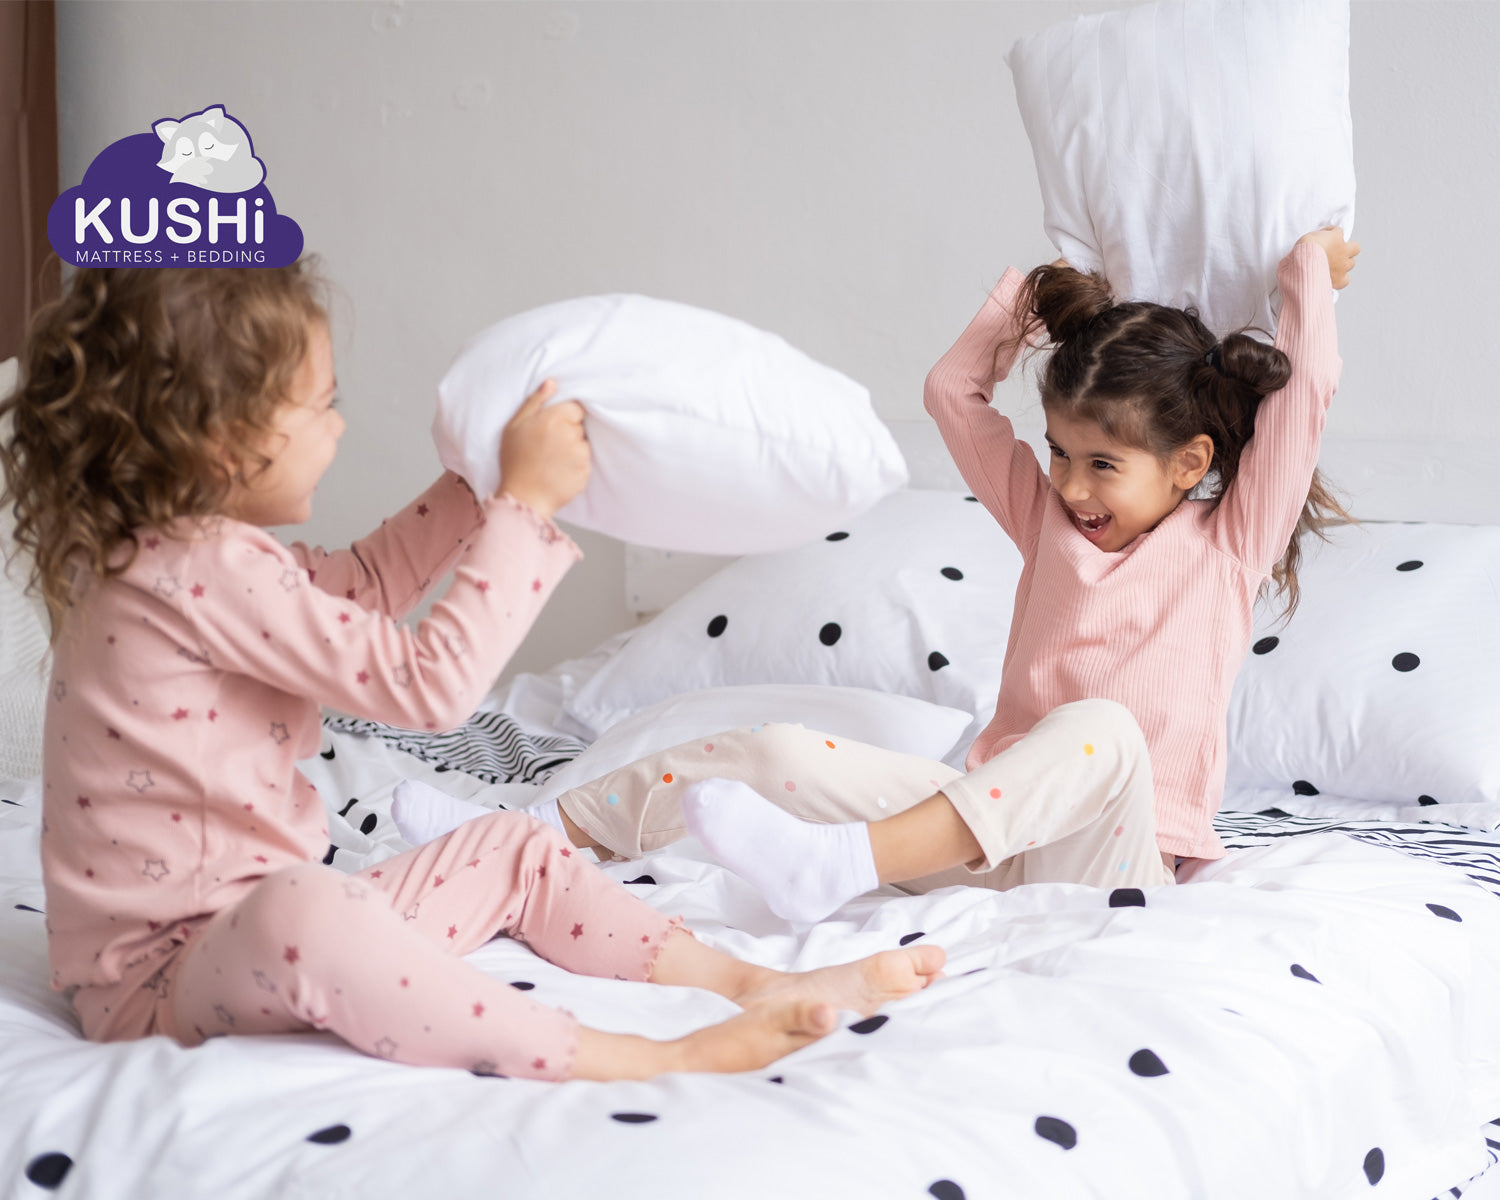 Helping Parents choose the best mattress for their Kids